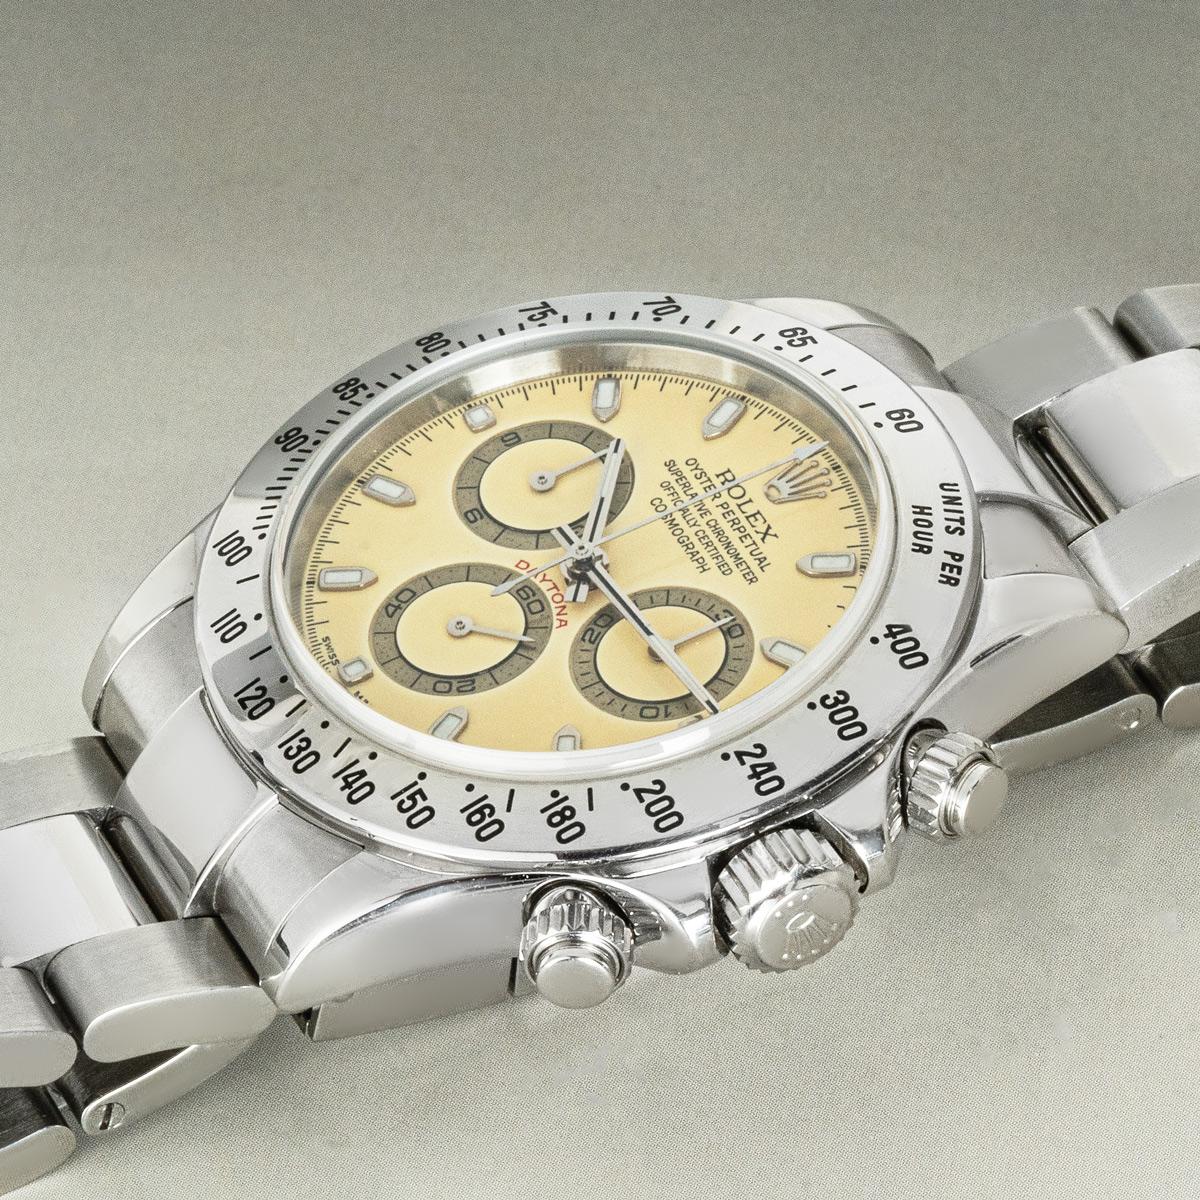 A rare Daytona in Oystersteel from Rolex, featuring a Citrus Lemon dial. With a tachymetric scale, three counters and pushers; the Daytona was designed to be the ultimate timing tool for endurance racing drivers.

The Oyster bracelet is equipped